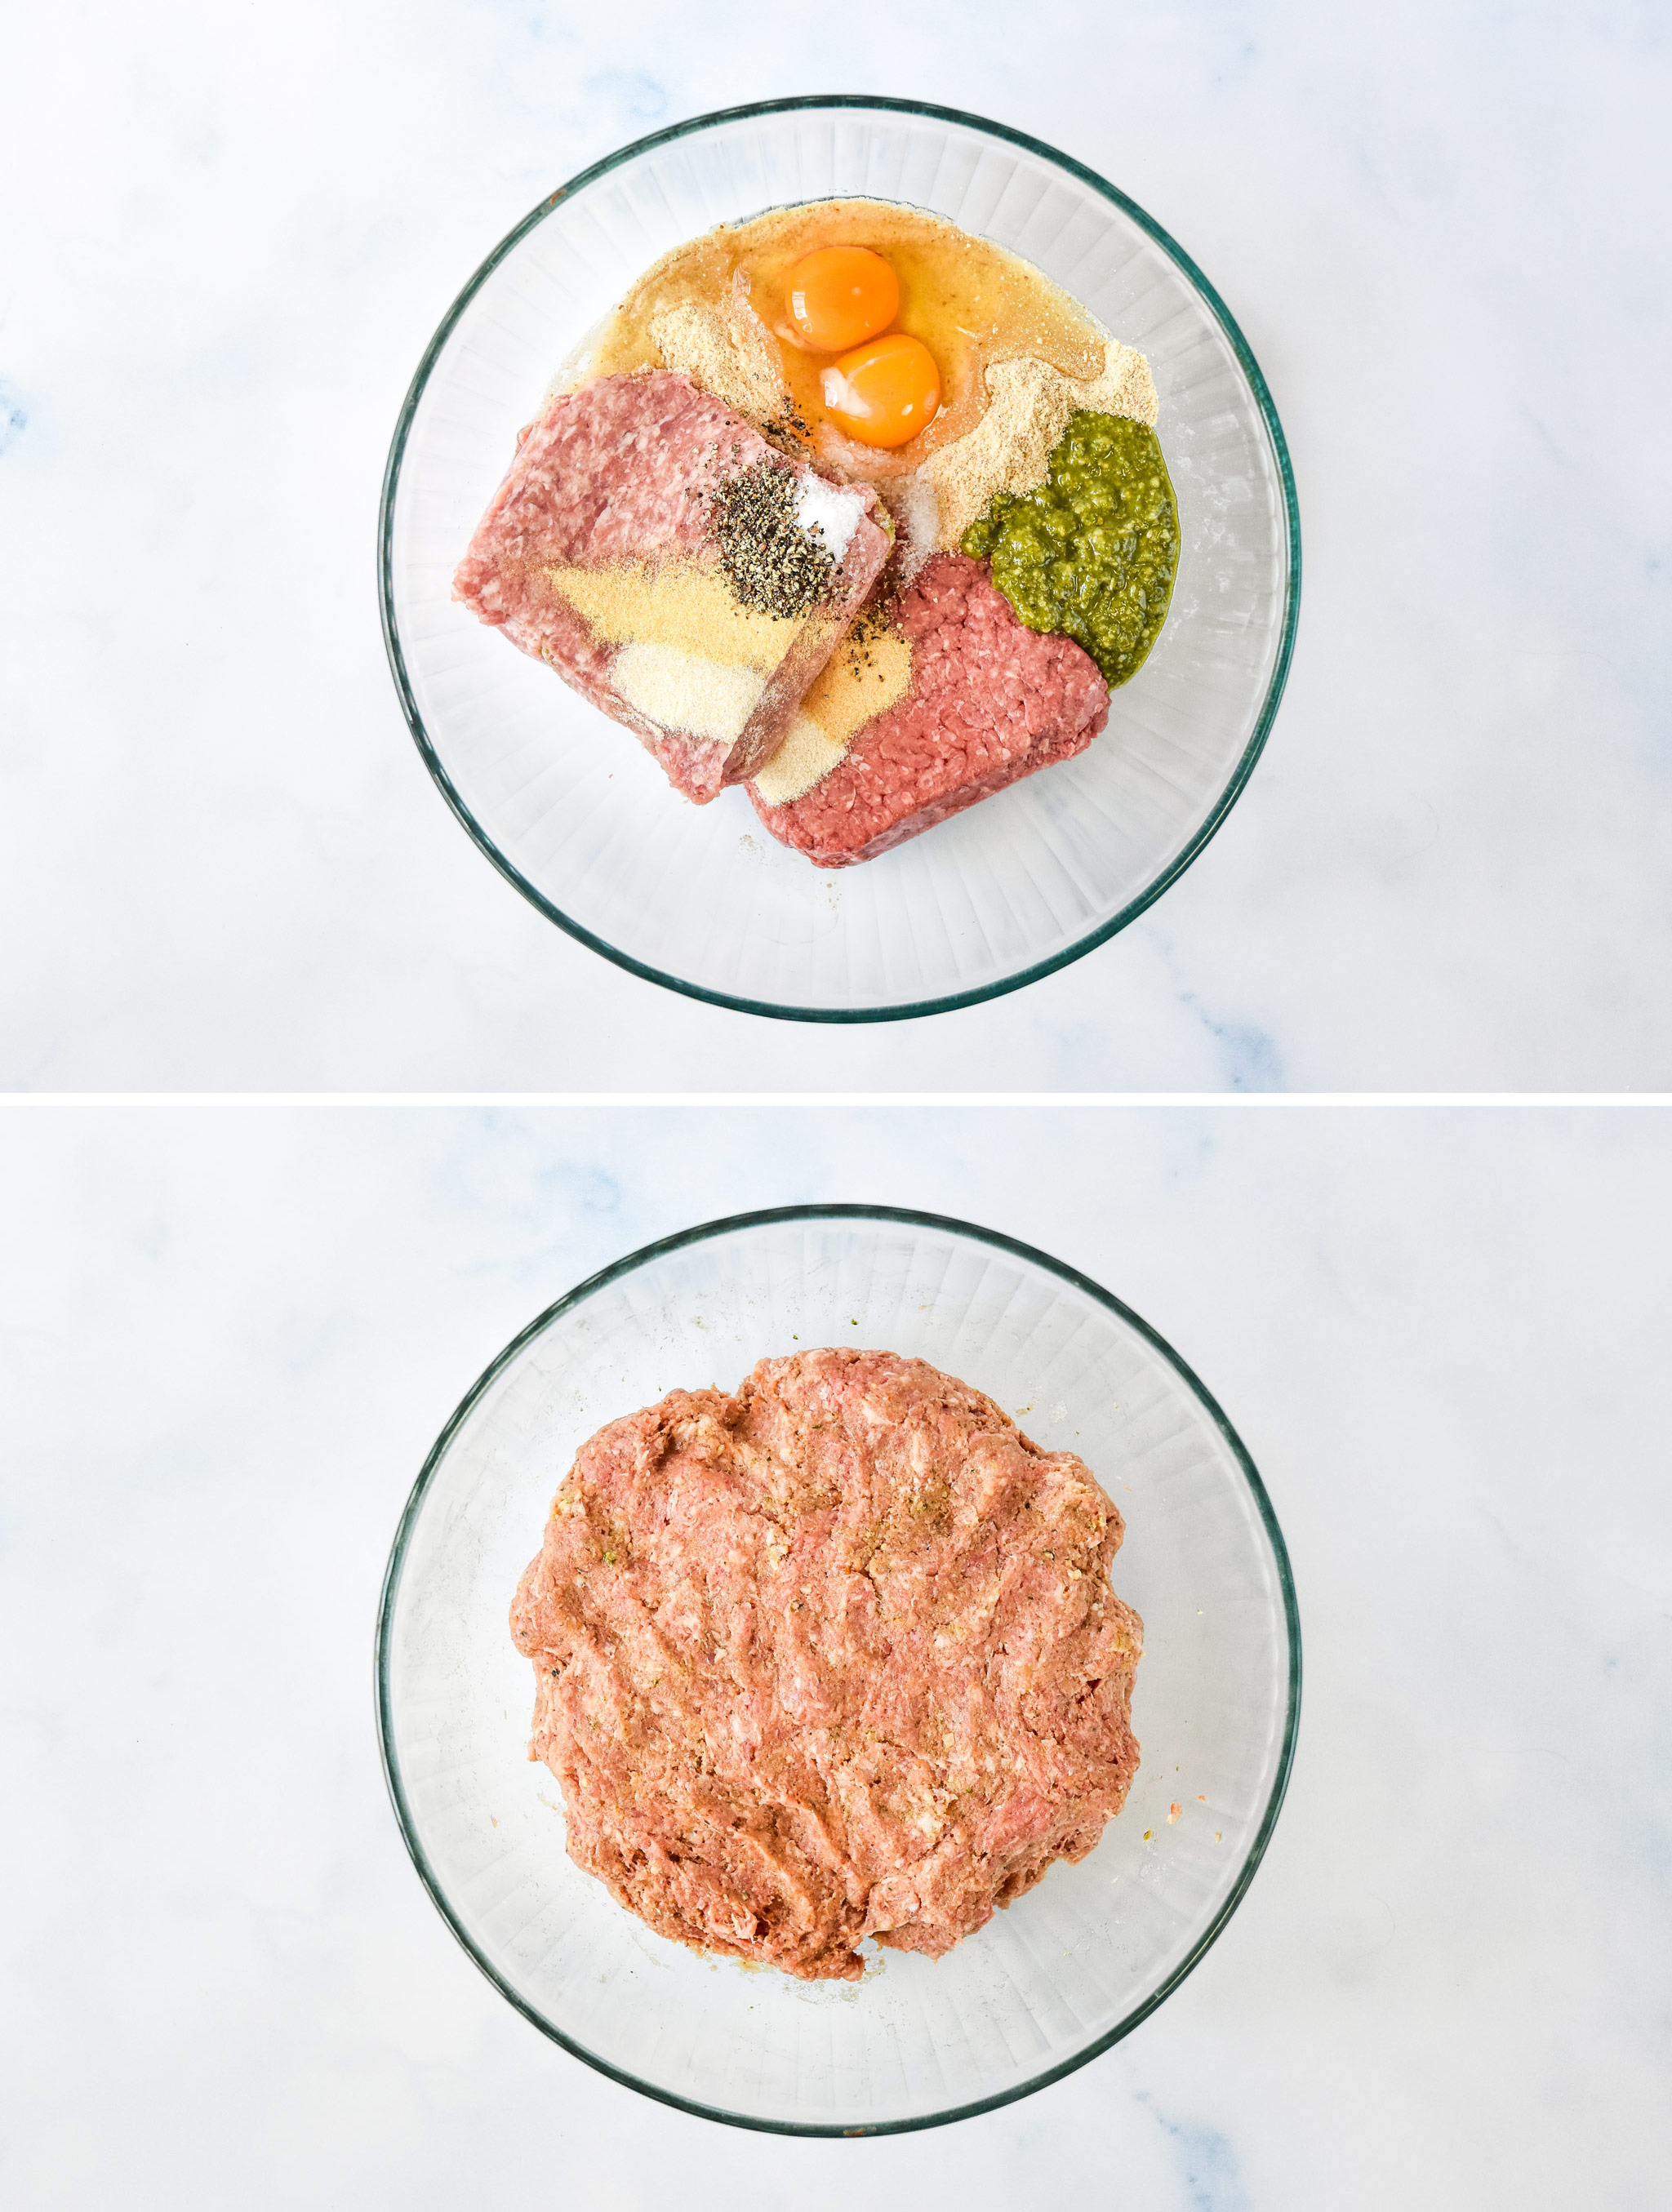 before and after mixing all the meatball ingredients together in a glass bowl.